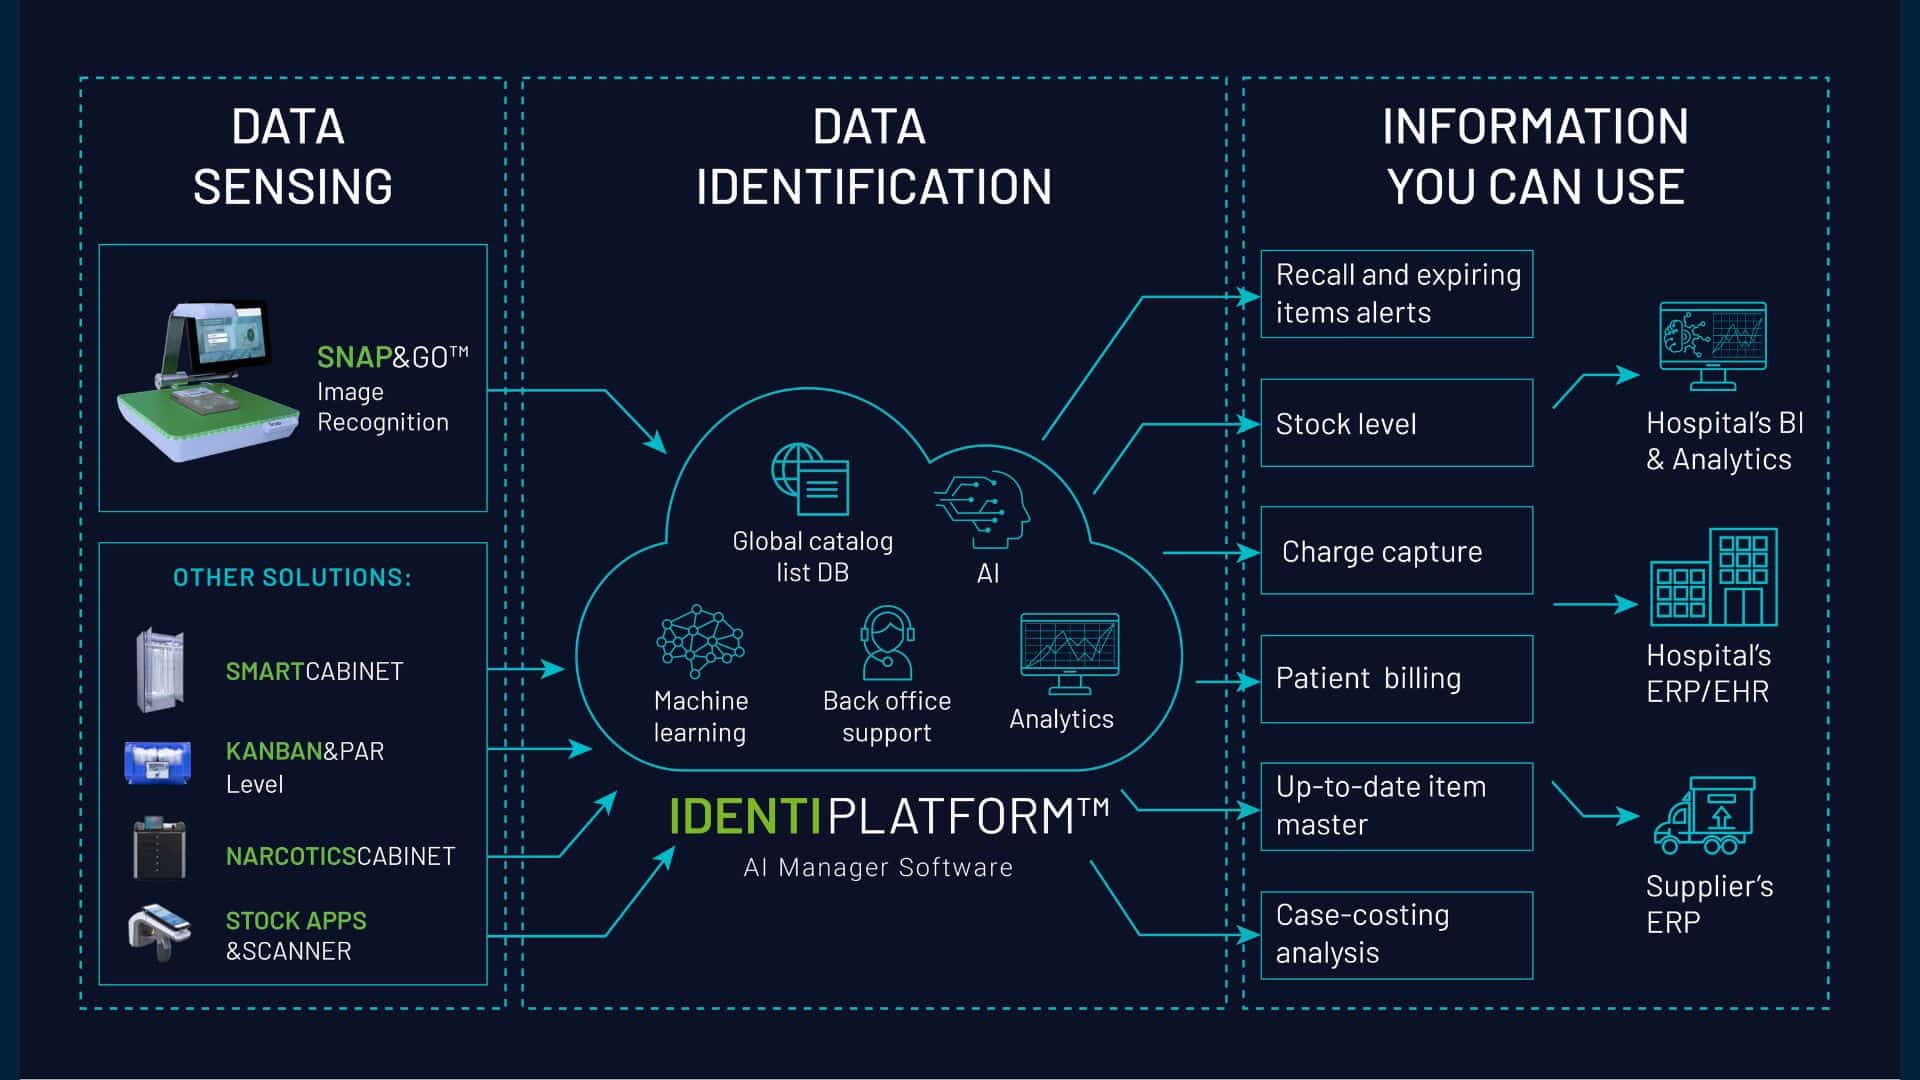 IDENTIPlatform - transforming inventory data into meaningful business intelligence for smarter inventory management